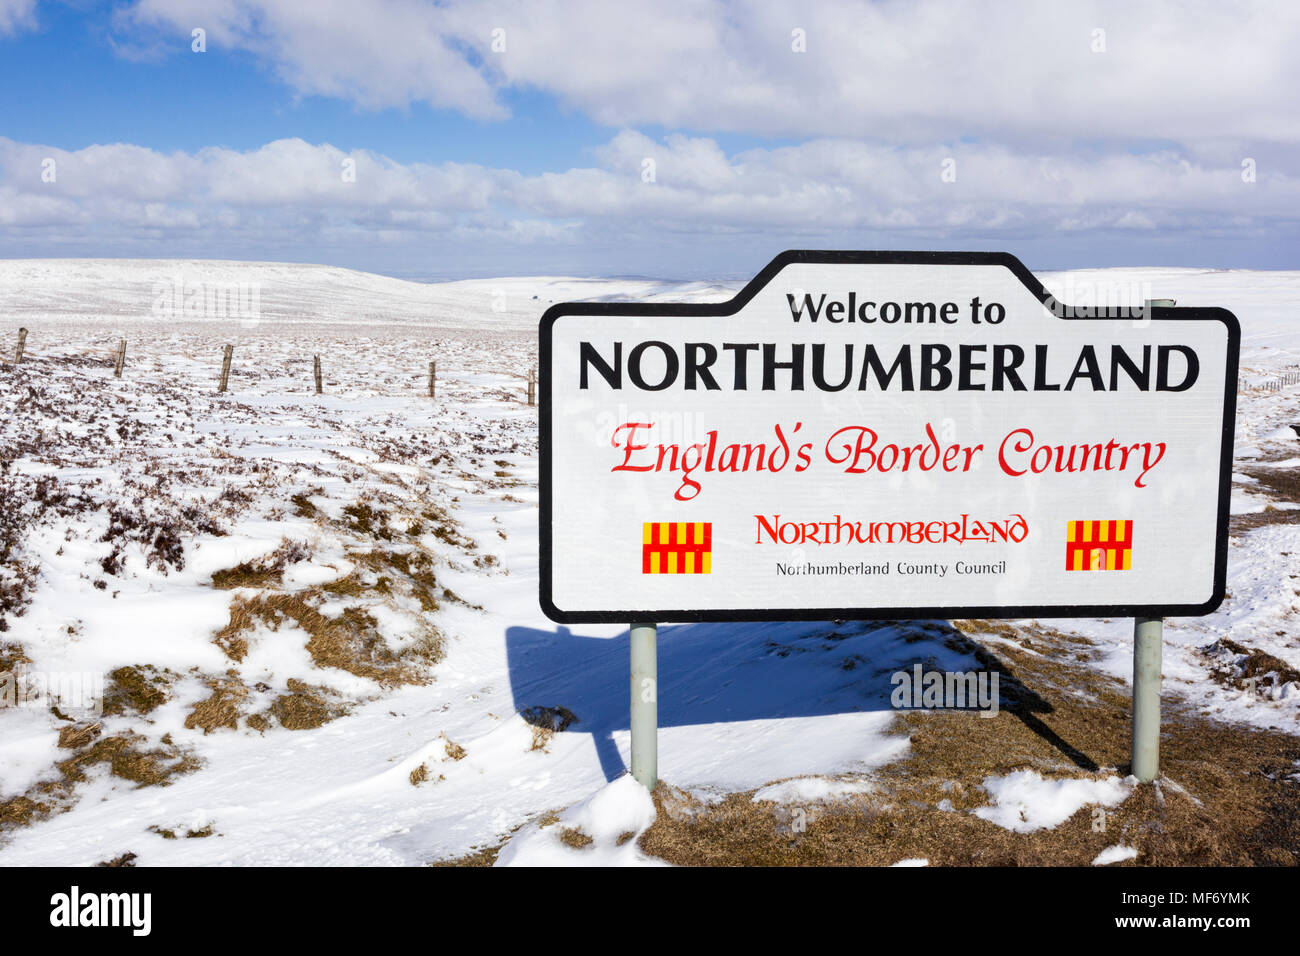 The Pennines in winter - A snowy landscape on the border between Cumbria and Northumberland near Nenthead UK Stock Photo